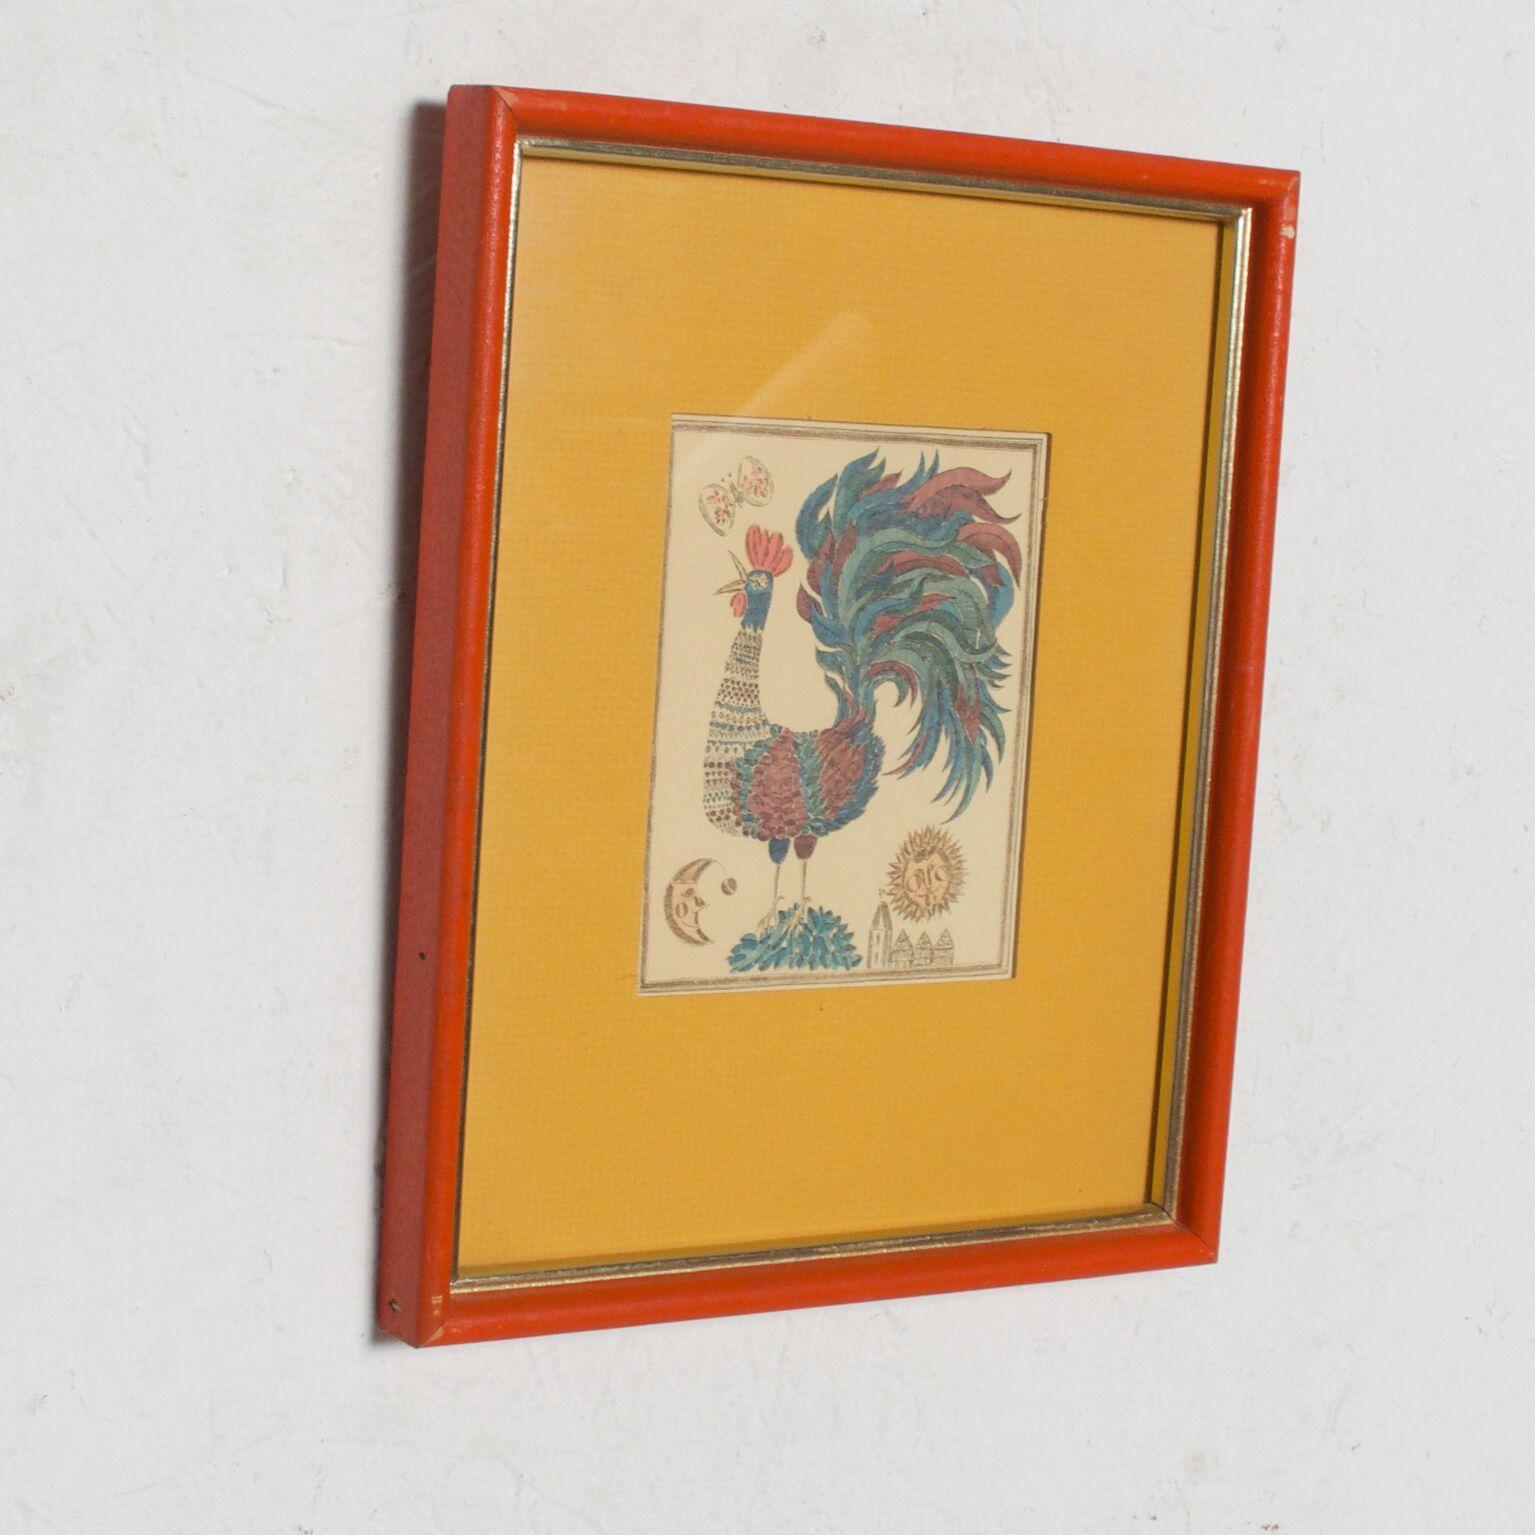 Midcentury Art Two Framed Prints Bright Rooster & Flower Orange Yellow 1970s A pair of small colorful art pieces; a rooster and a floral print.
Orange and yellow colors dominant. 
Framed with glass. 
No signature. 
9w 11h Art: 4 x 5h each piece.